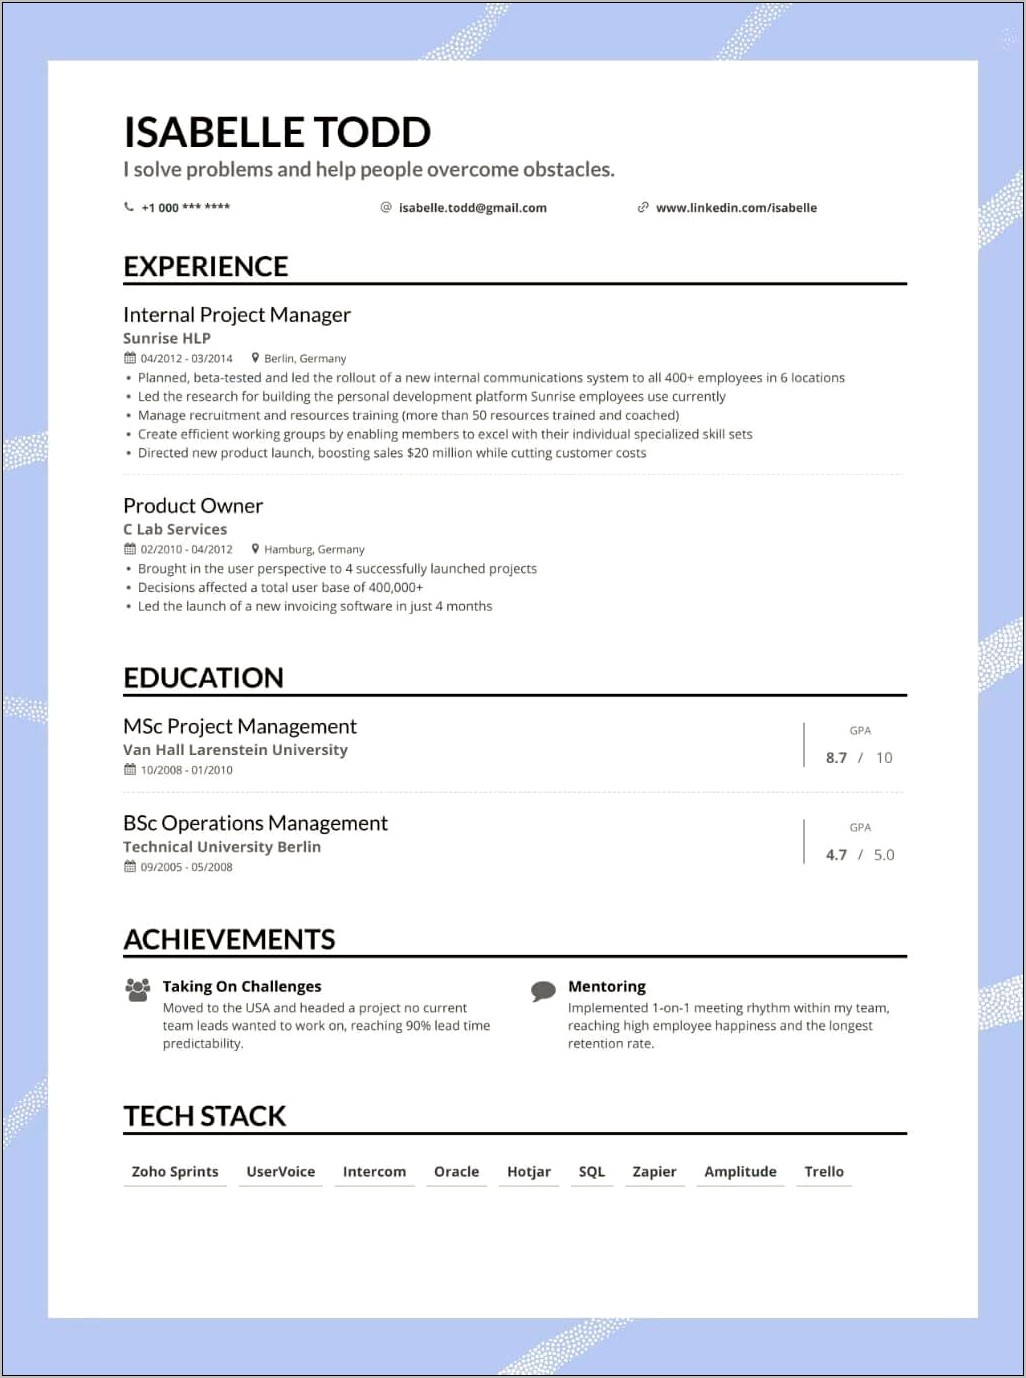 Resume Section For Current Job